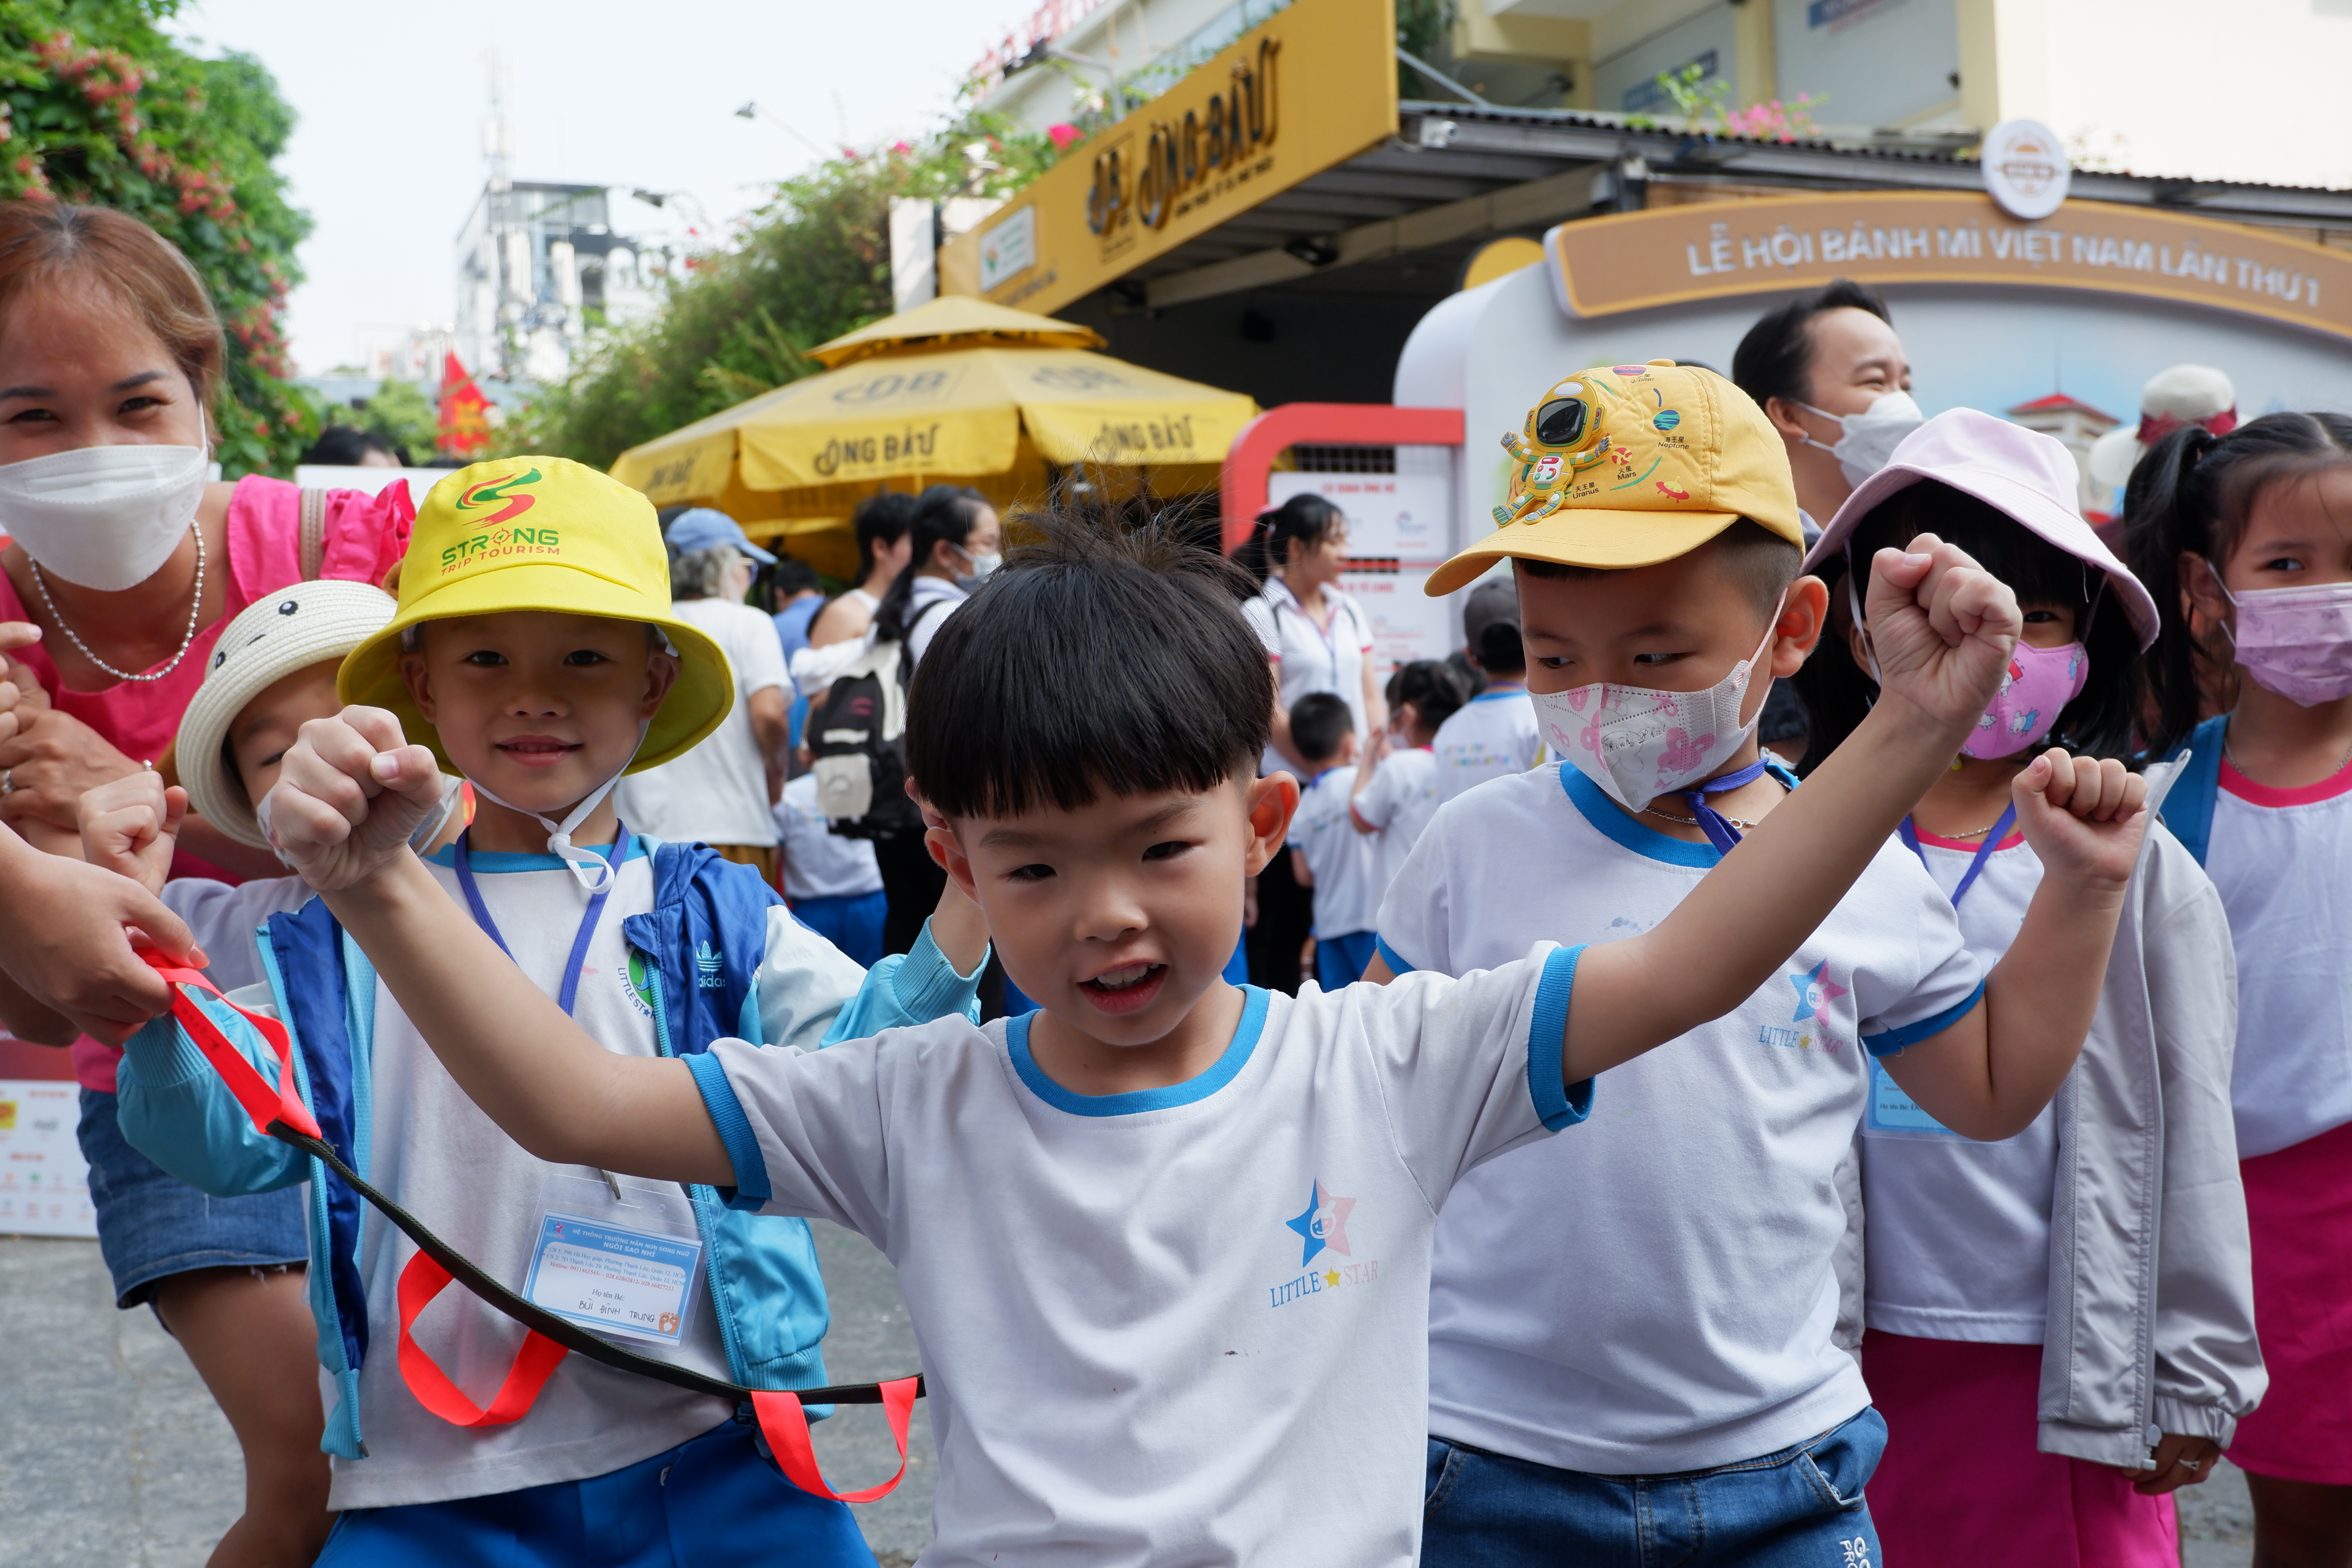 Kids express their happiness when joining the ongoing Banh Mi Festival in downtown Ho Chi Minh City. Photo: Minh Duy / Tuoi Tre News